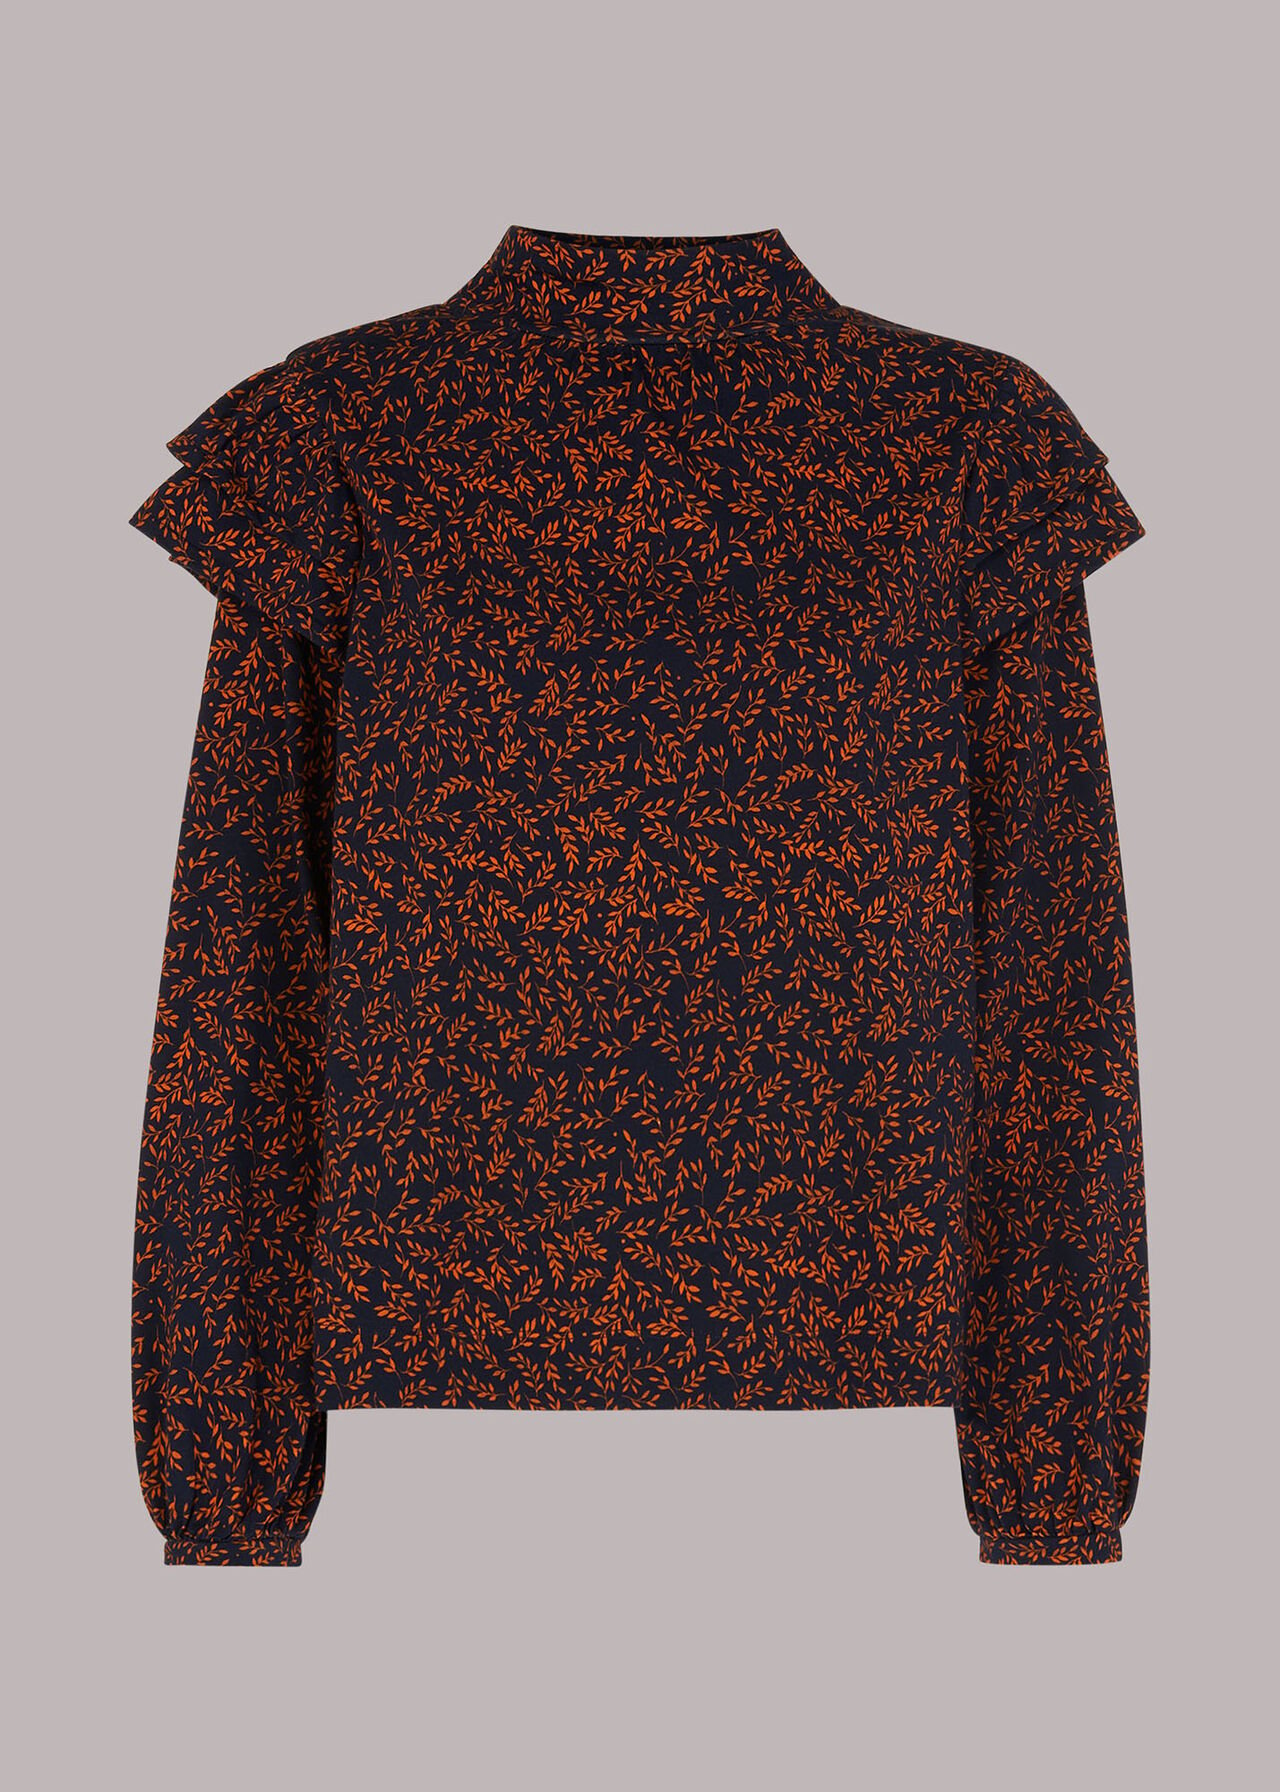 Autumn Leaves Jersey Top